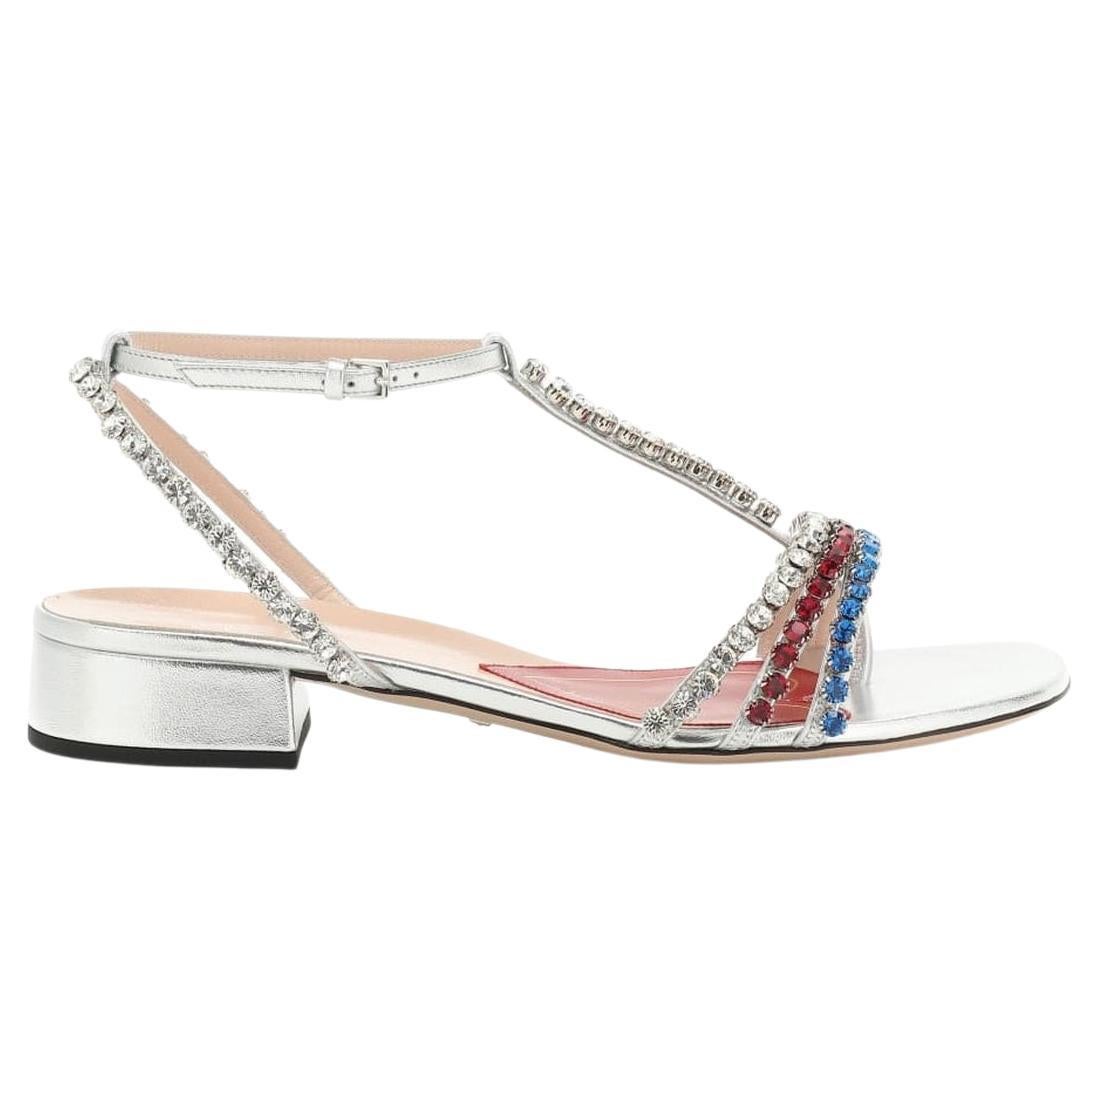 Gucci Bertie Embellished Metallic Leather Sandals IT 39.5 For Sale